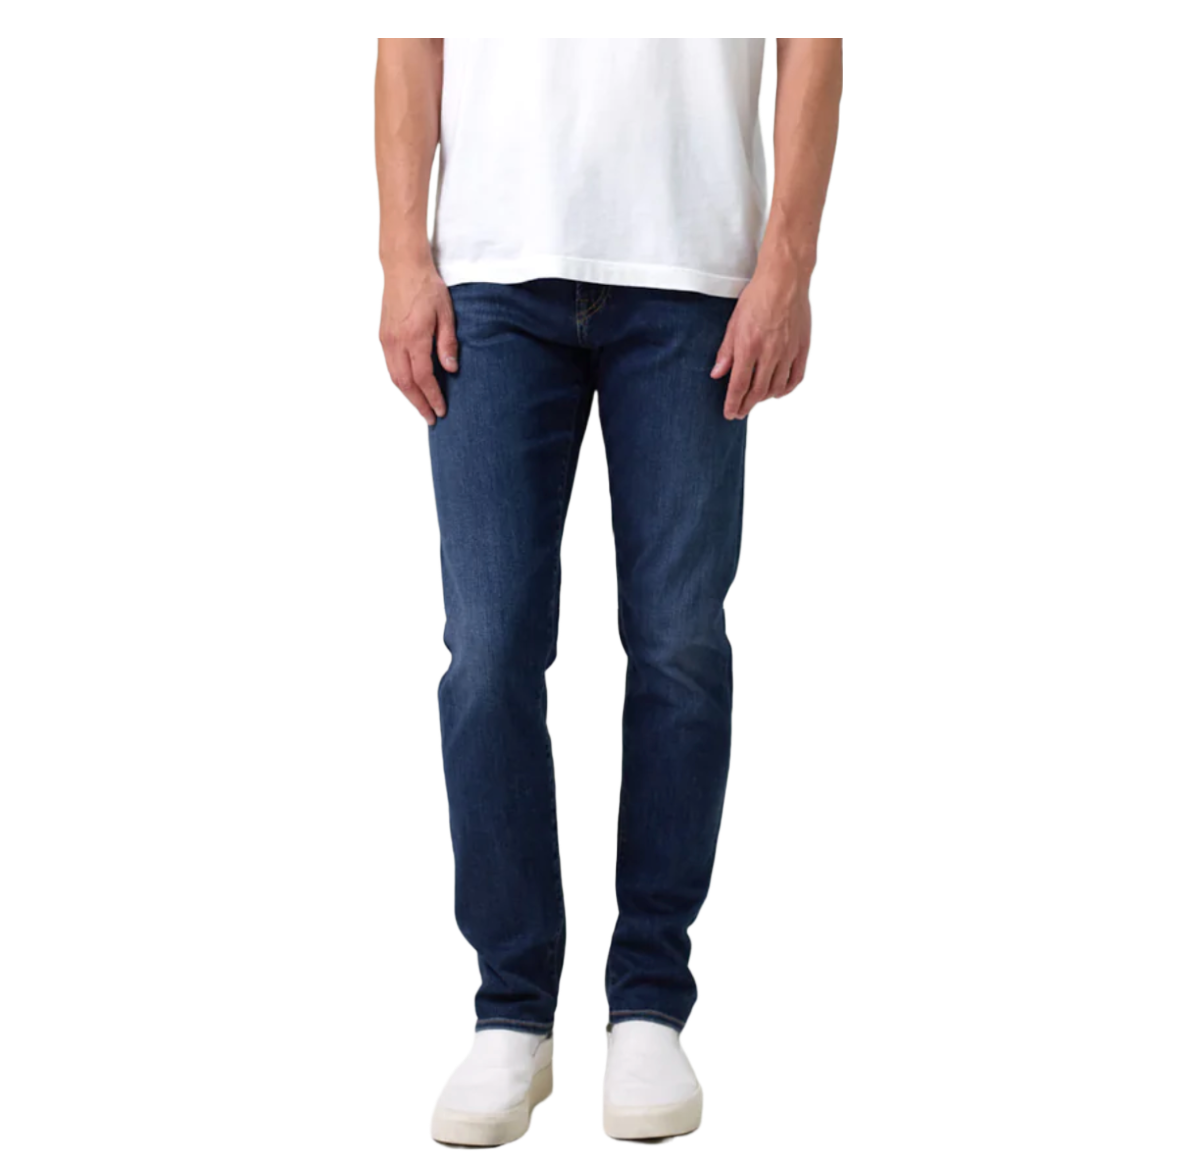 Citizens Of Humanity London Slim Fit Jeans